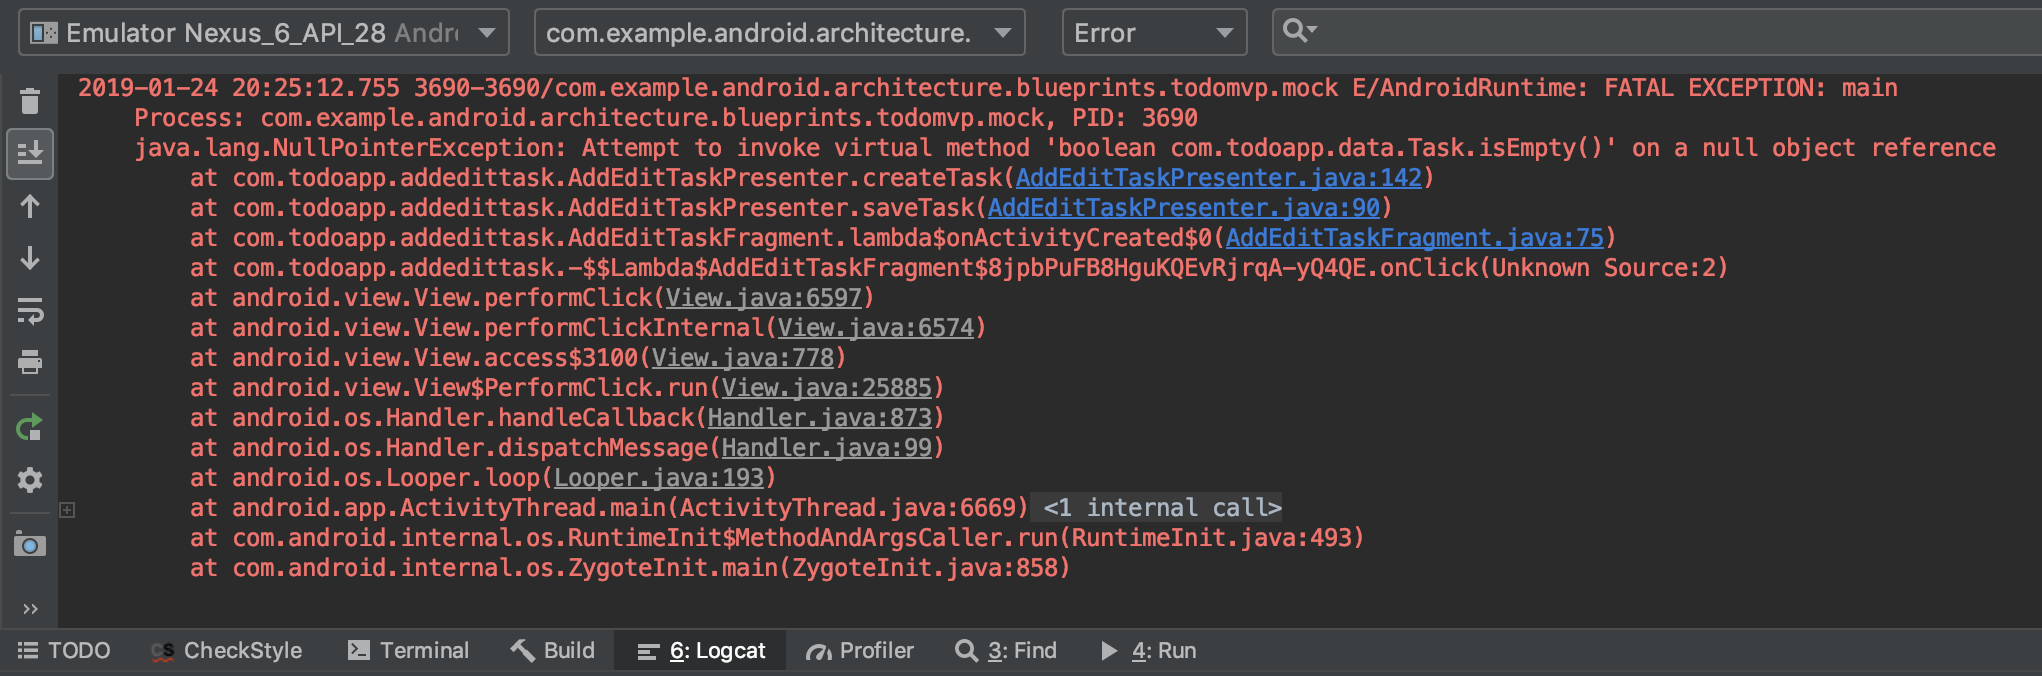 Android: Analyze Stack Trace from Plain Text Log